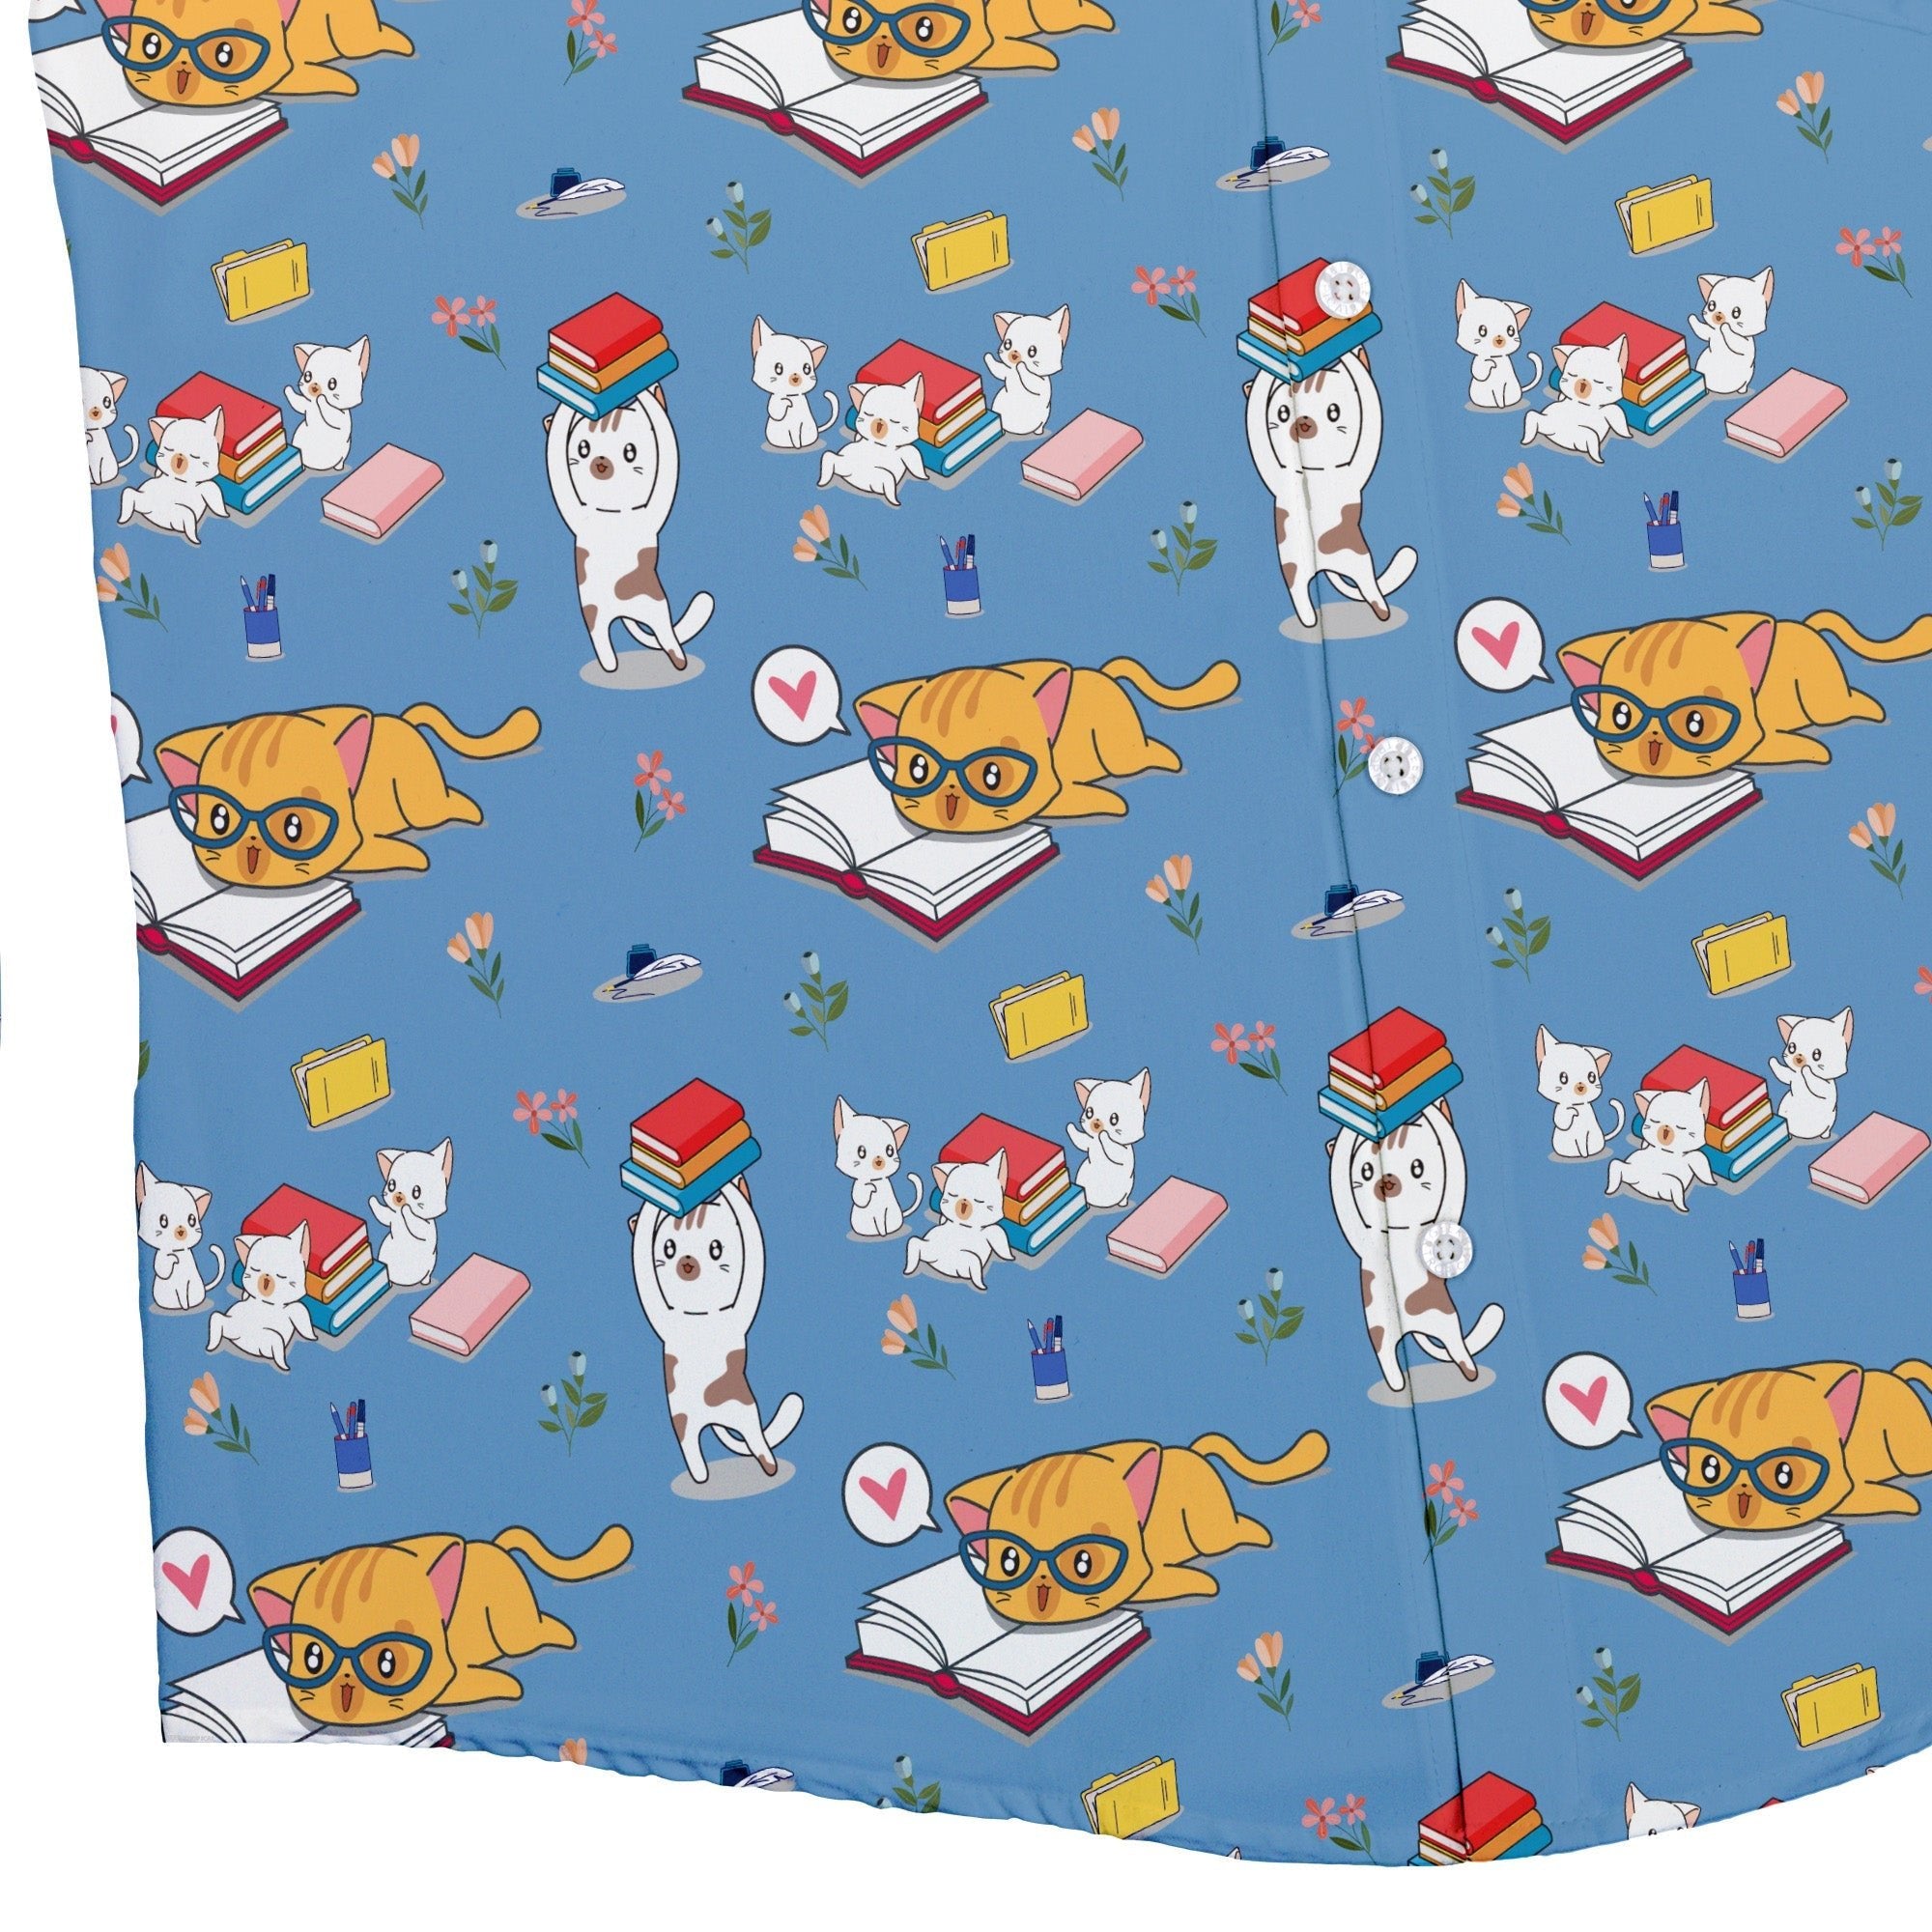 Book Nerd Cats Button Up Shirt - adult sizing - Animal Patterns - Book Prints